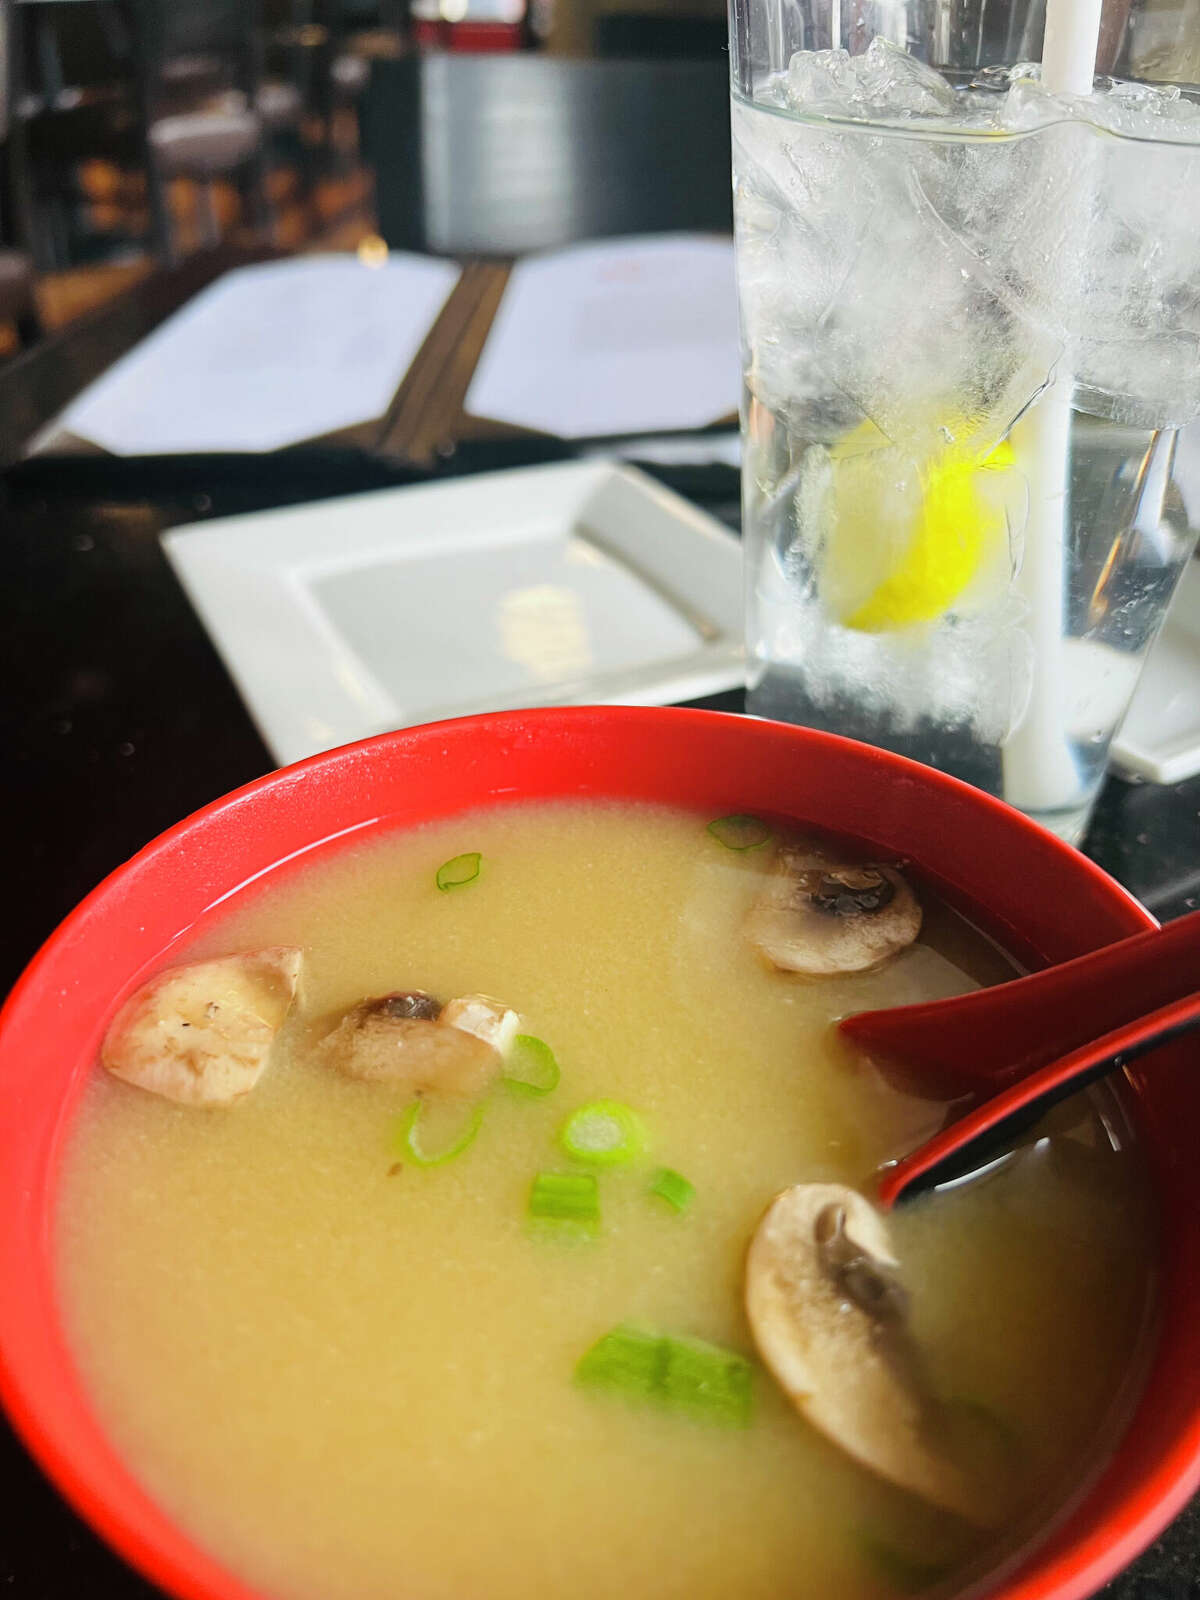 Wasabi’s miso soup, which is a traditional Japanese brothy soup with a toasty savory flavor and salty sweet richness that contains cubes of tofu, mushrooms and bits of green onions.